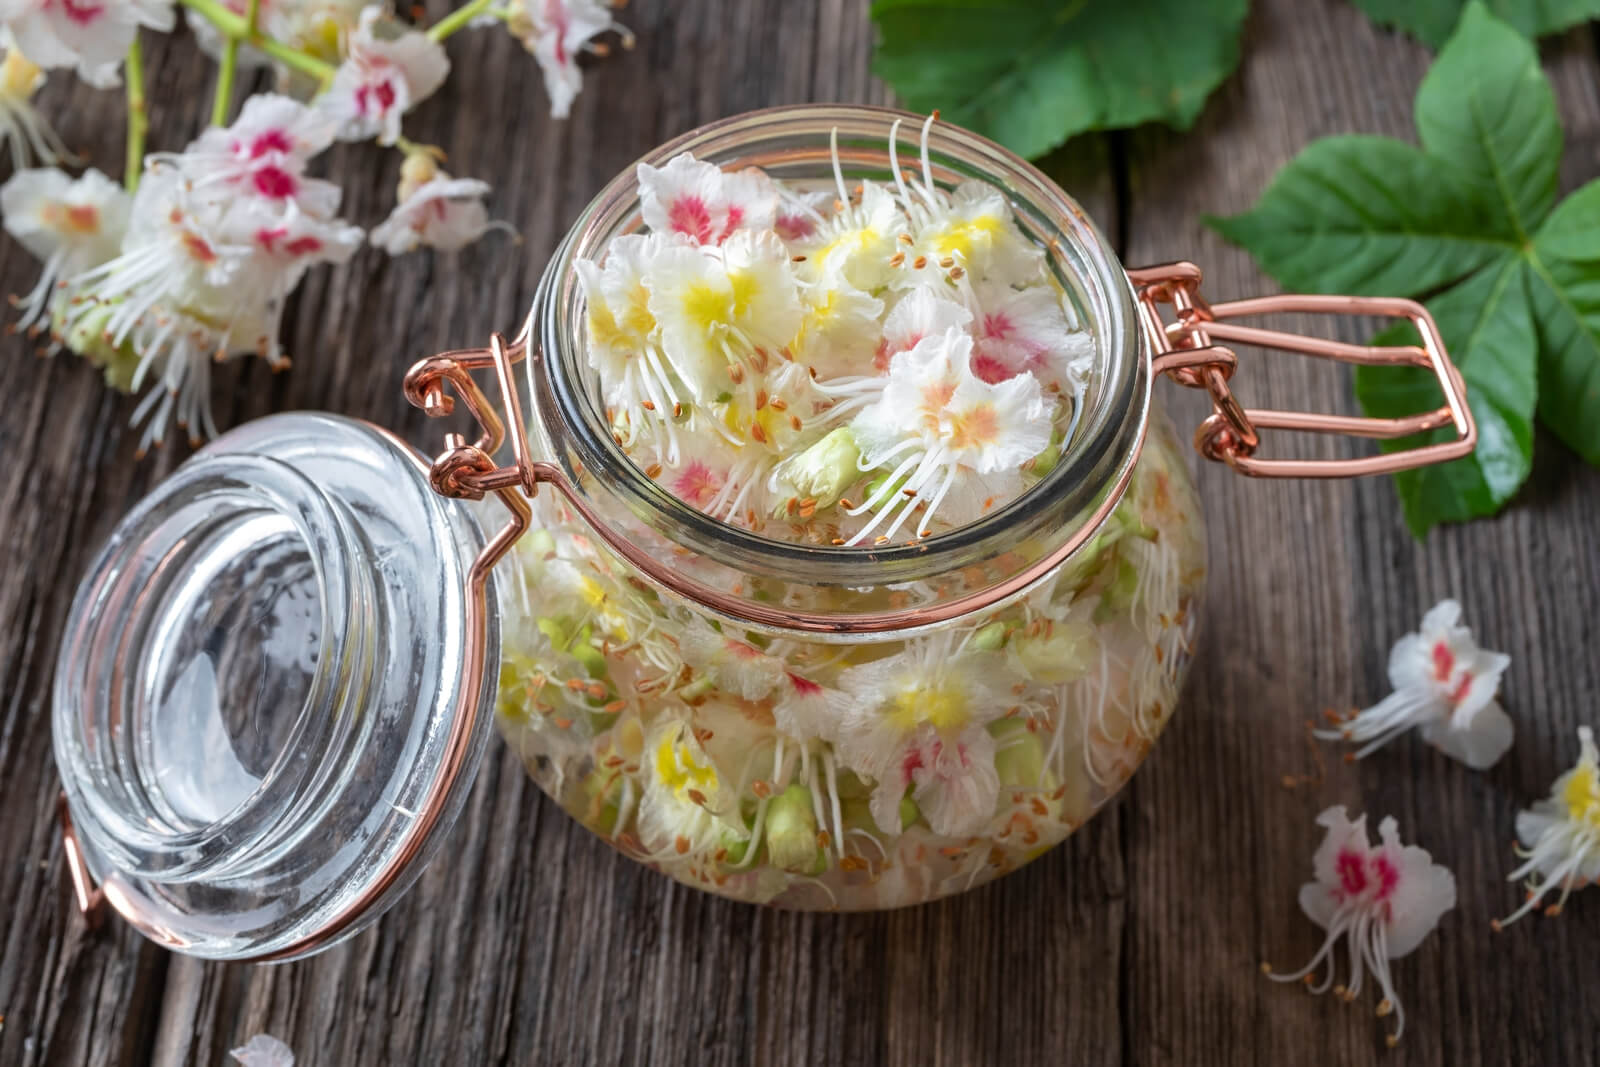 Preparation of herbal tincture from horse chestnut blossoms. A bottle filled with horse chestnut blossoms and alcohol.